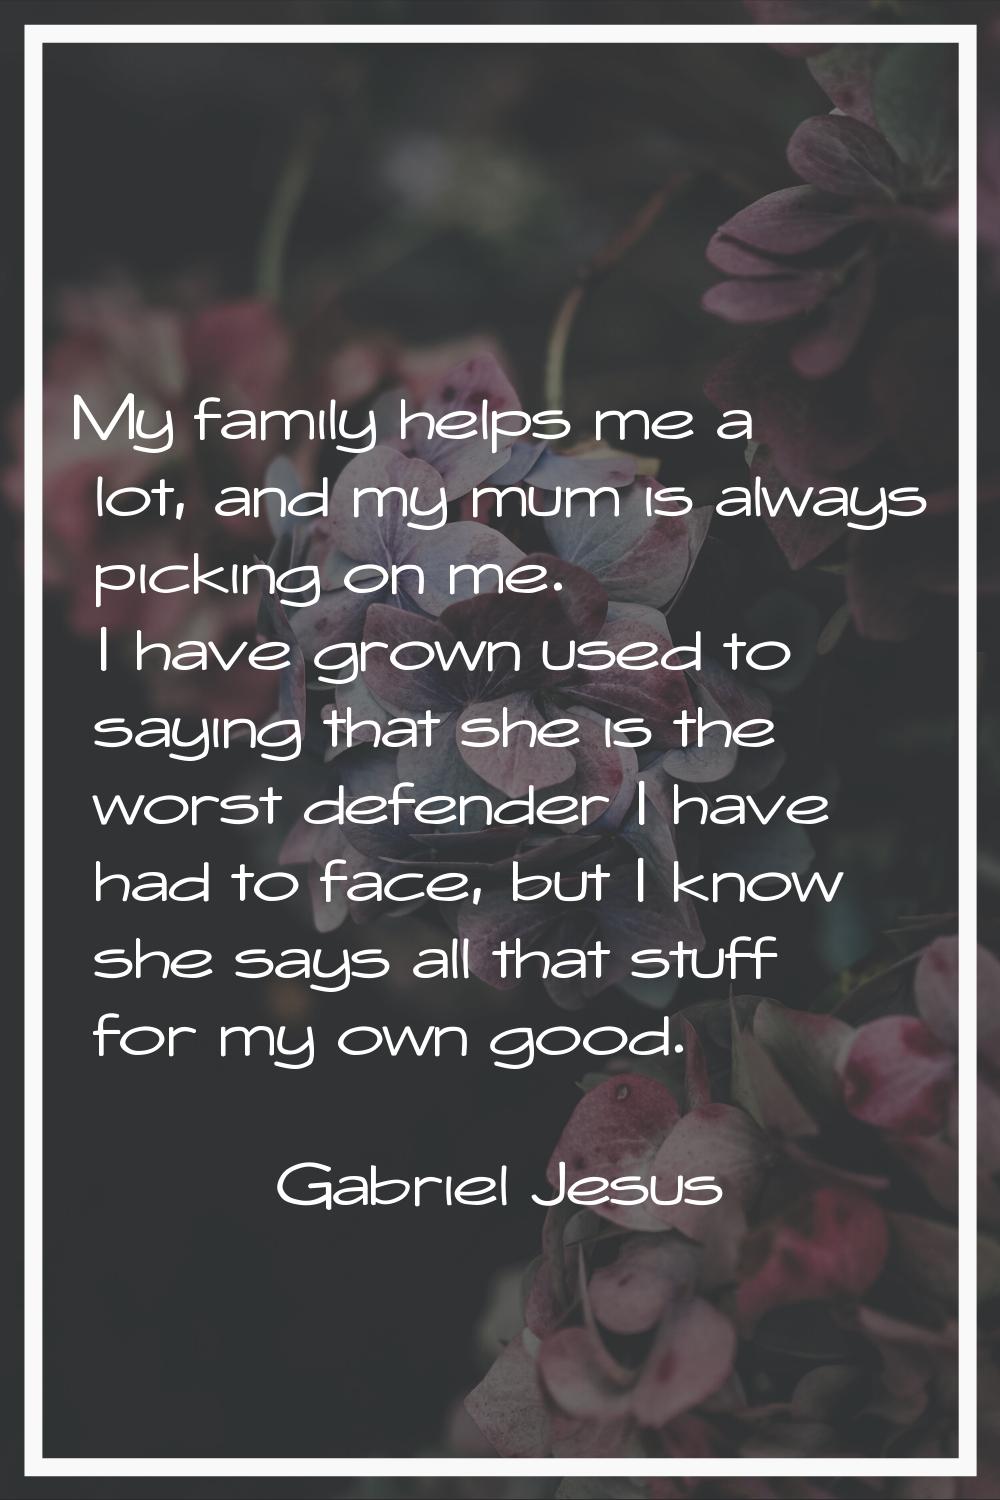 My family helps me a lot, and my mum is always picking on me. I have grown used to saying that she 